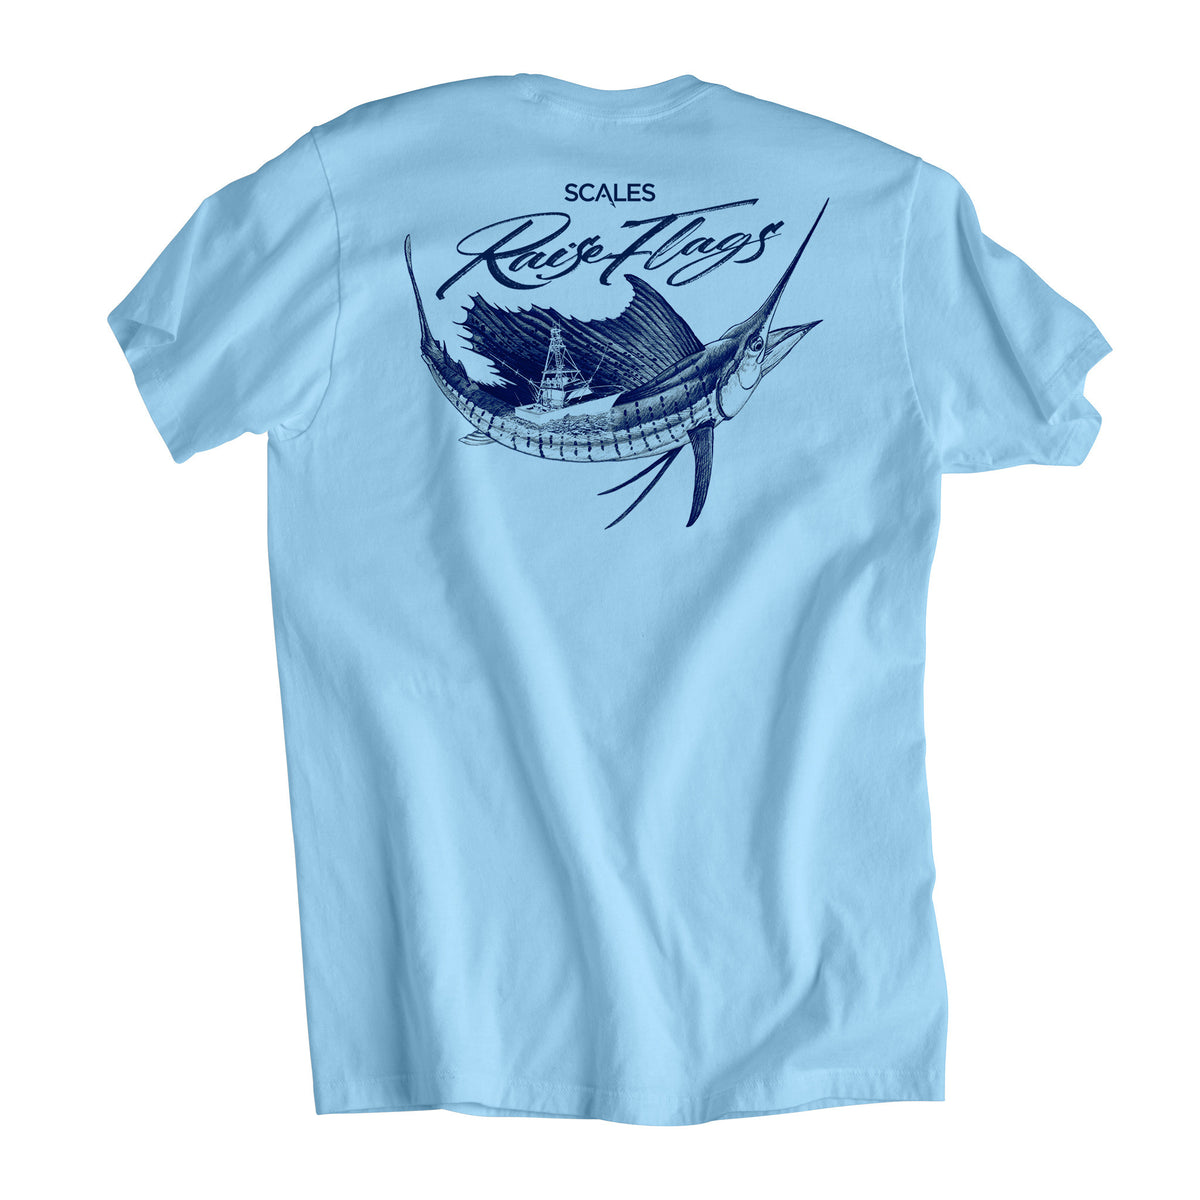 SCALES Popping Sails Premium Short Sleeve Tee